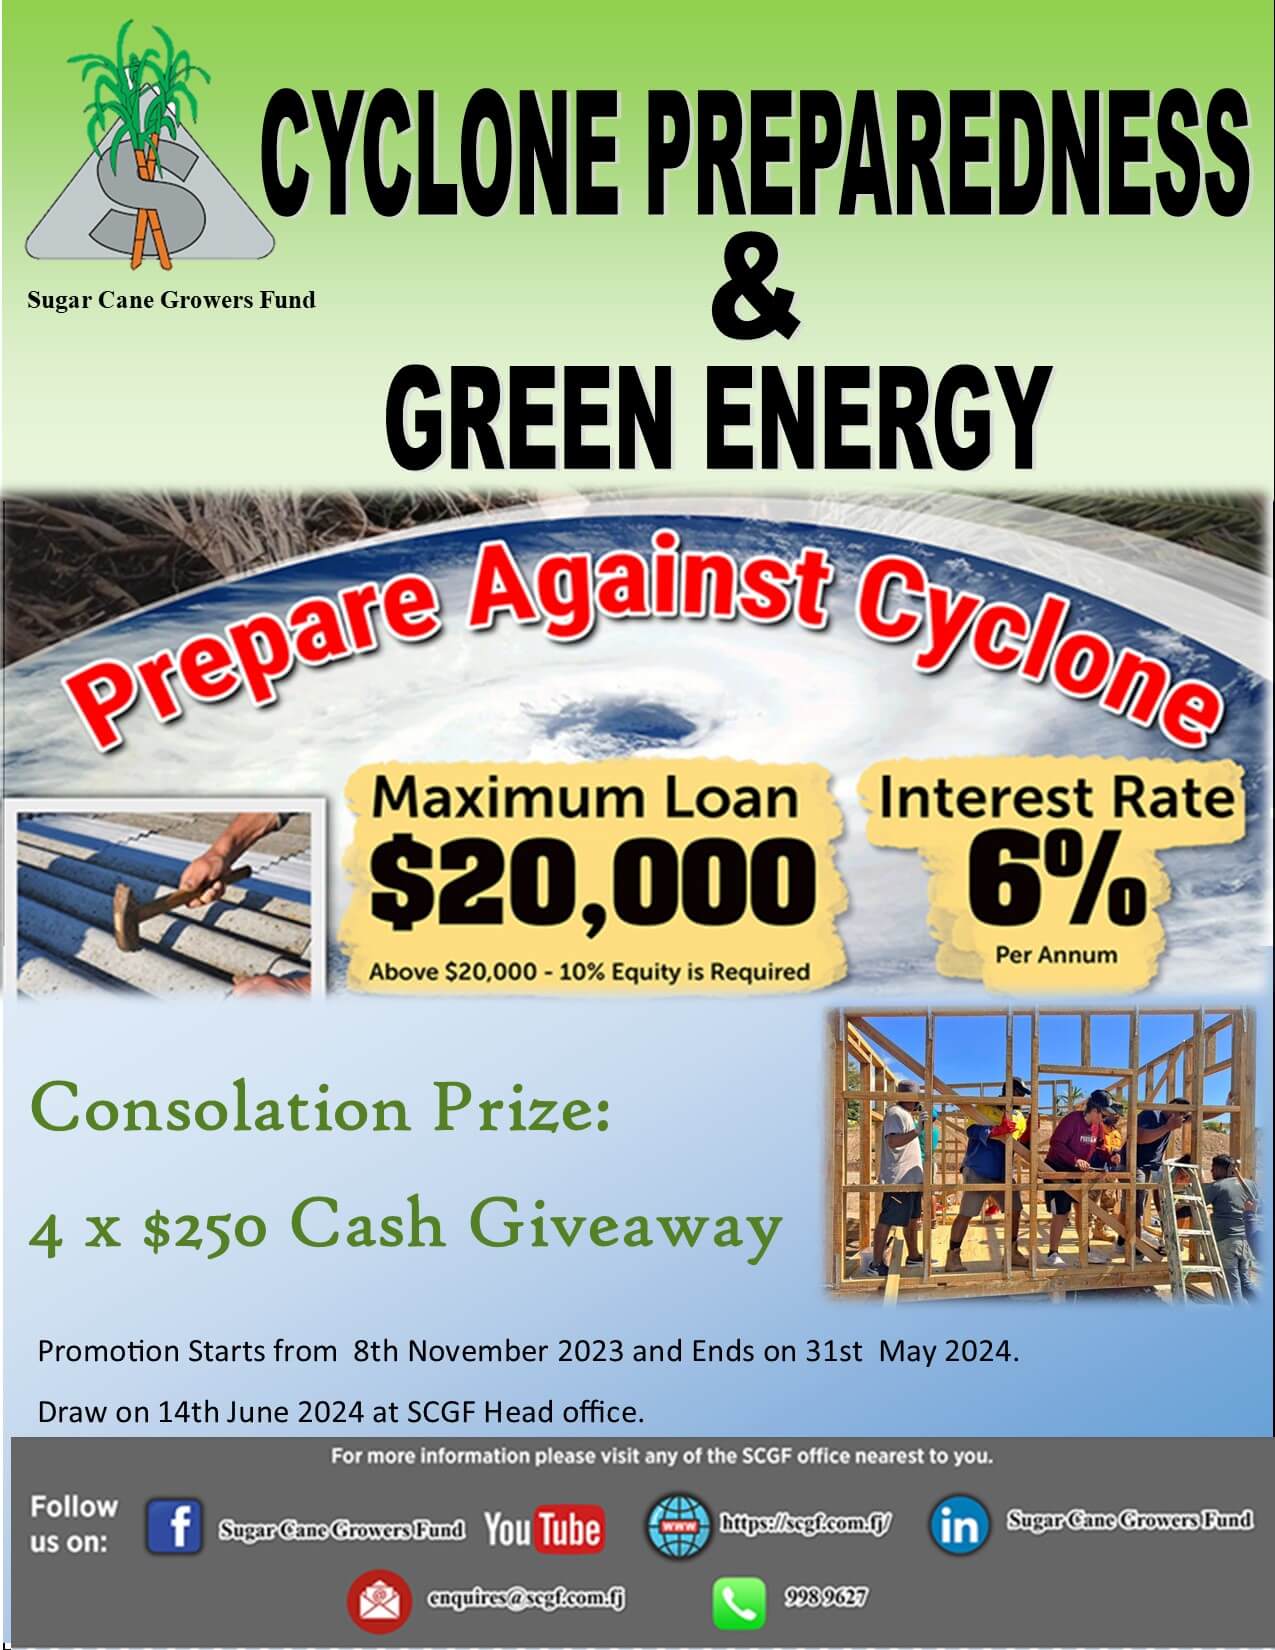 SCGF launches Cyclone Preparedness and Green Energy Loan Promotion